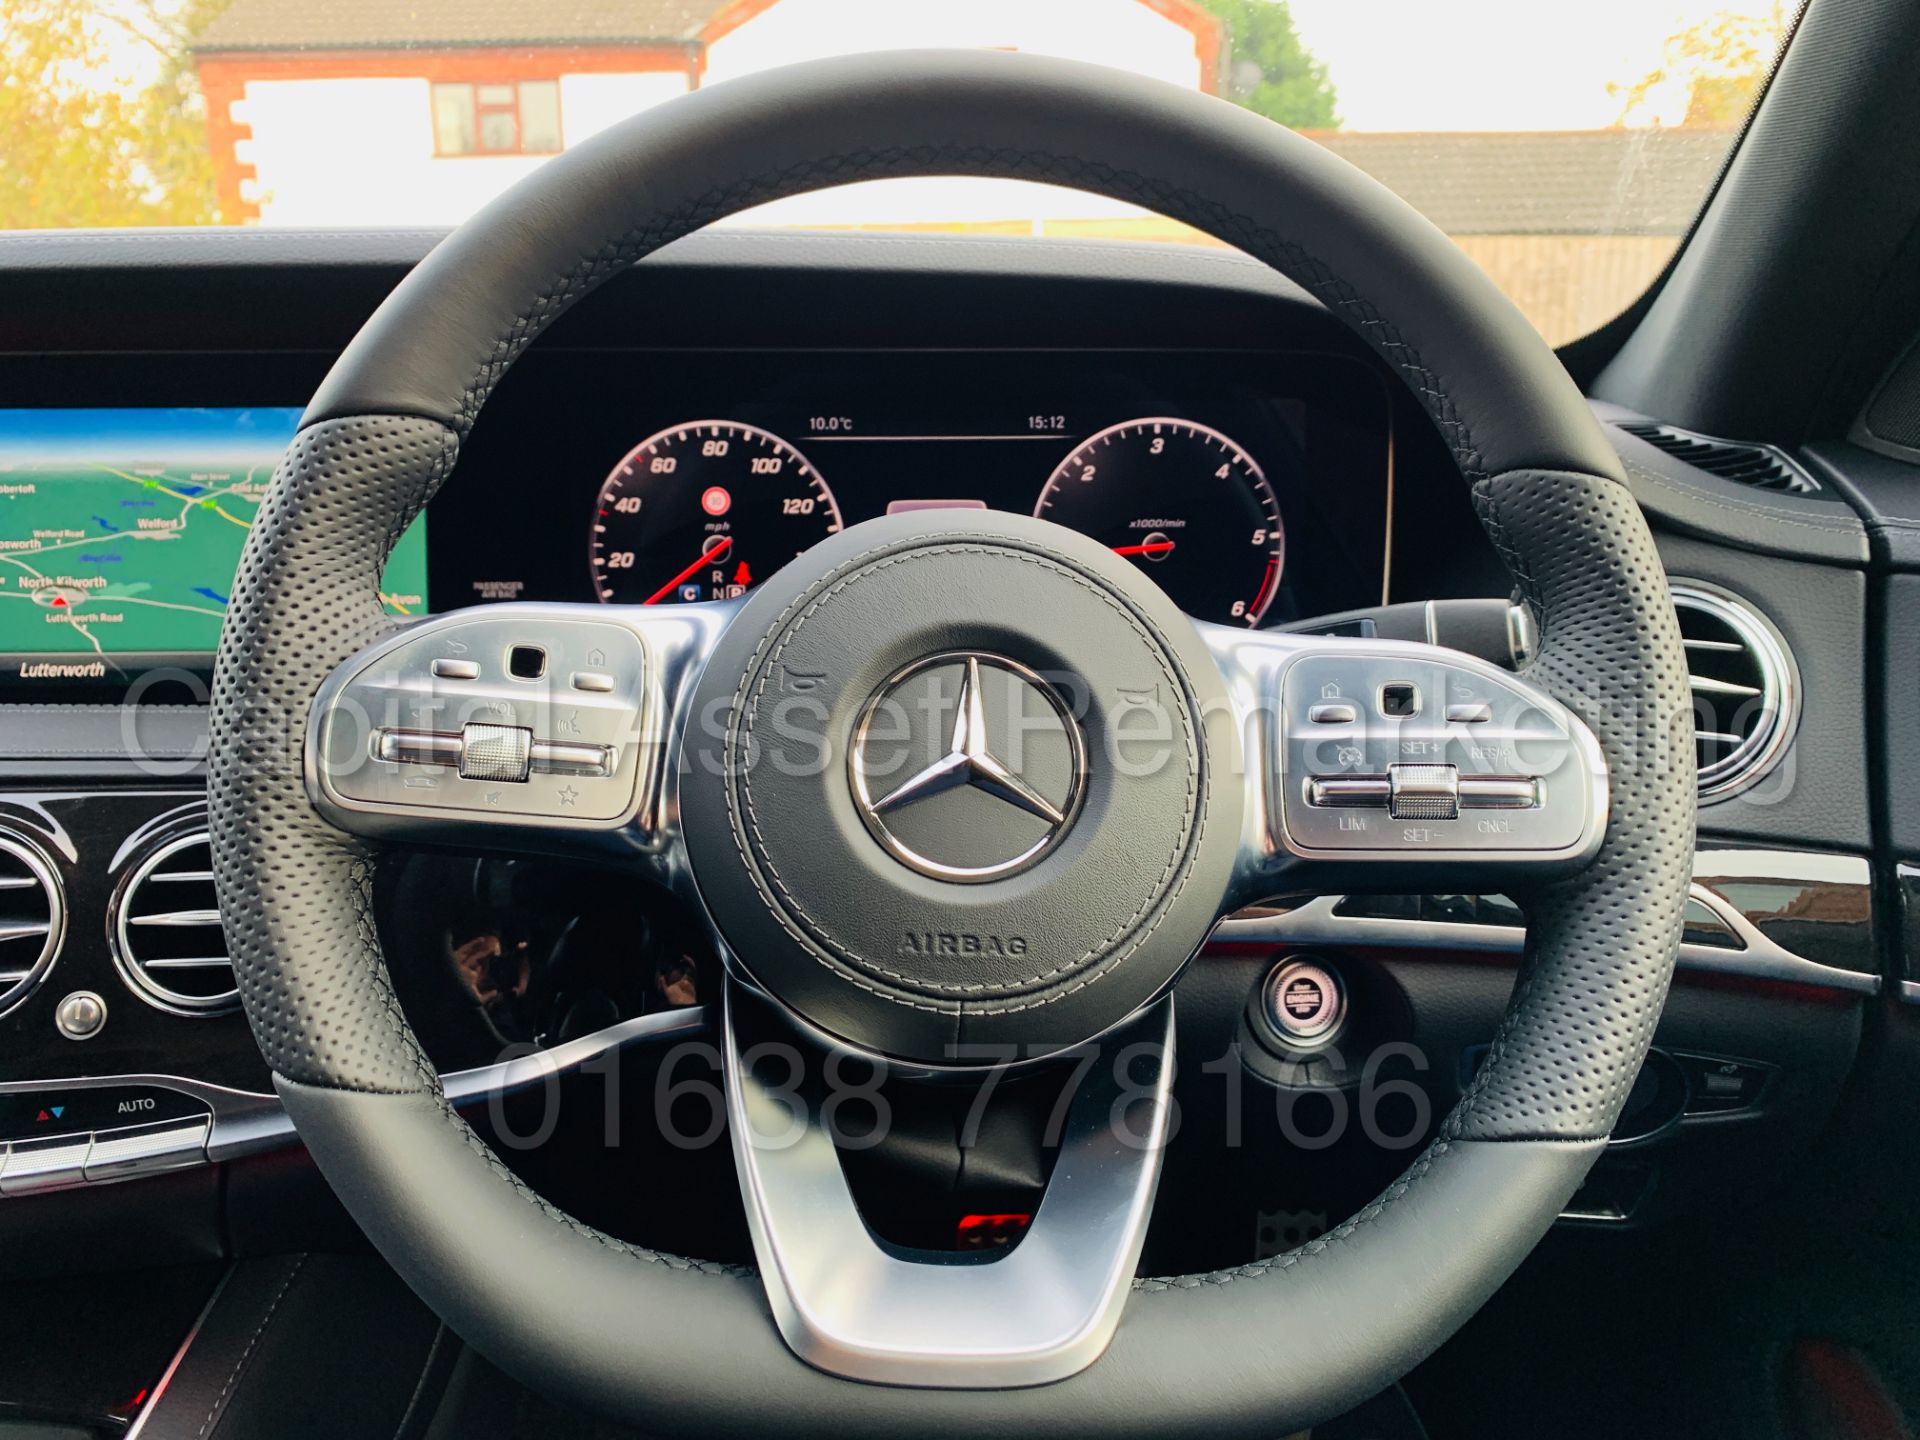 (On Sale) MERCEDES-BENZ S350d LWB *AMG - LUXURY SALOON* (69 REG) 9-G TRONIC AUTO *TOP OF THE RANGE* - Image 63 of 66